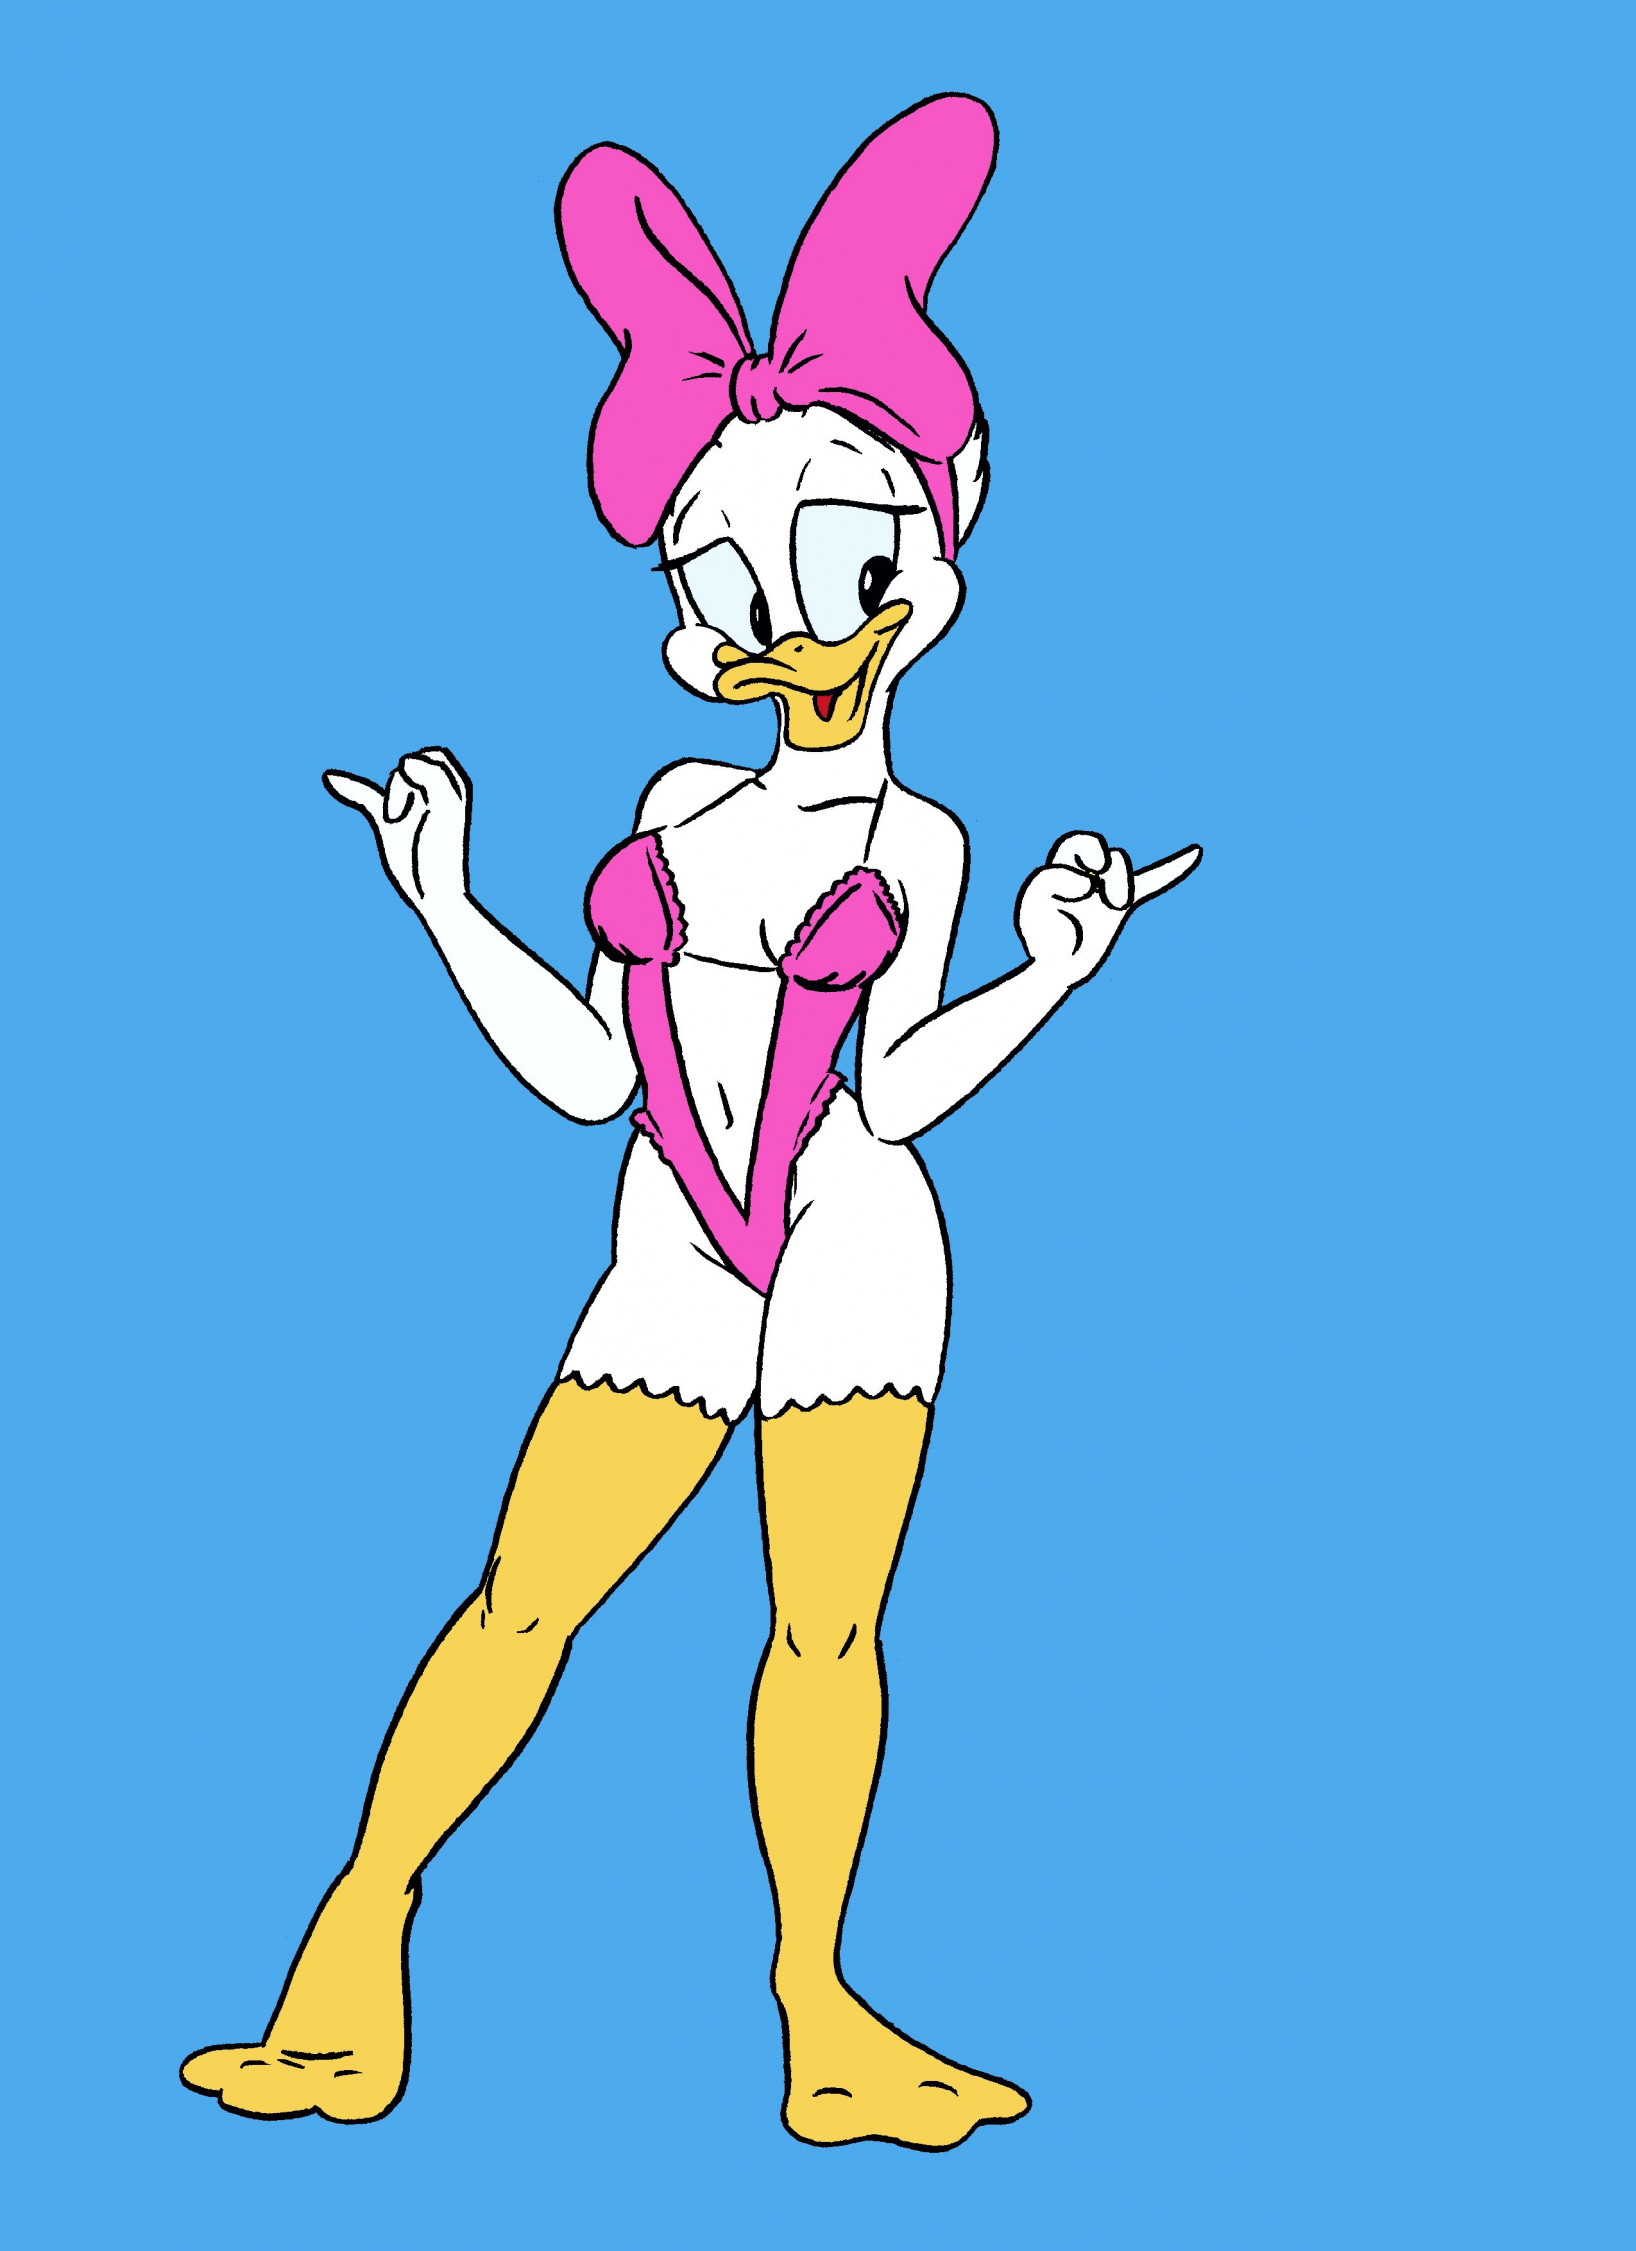 Daisy Duck and the Honey Tree by don234a -- Fur Affinity [dot] net